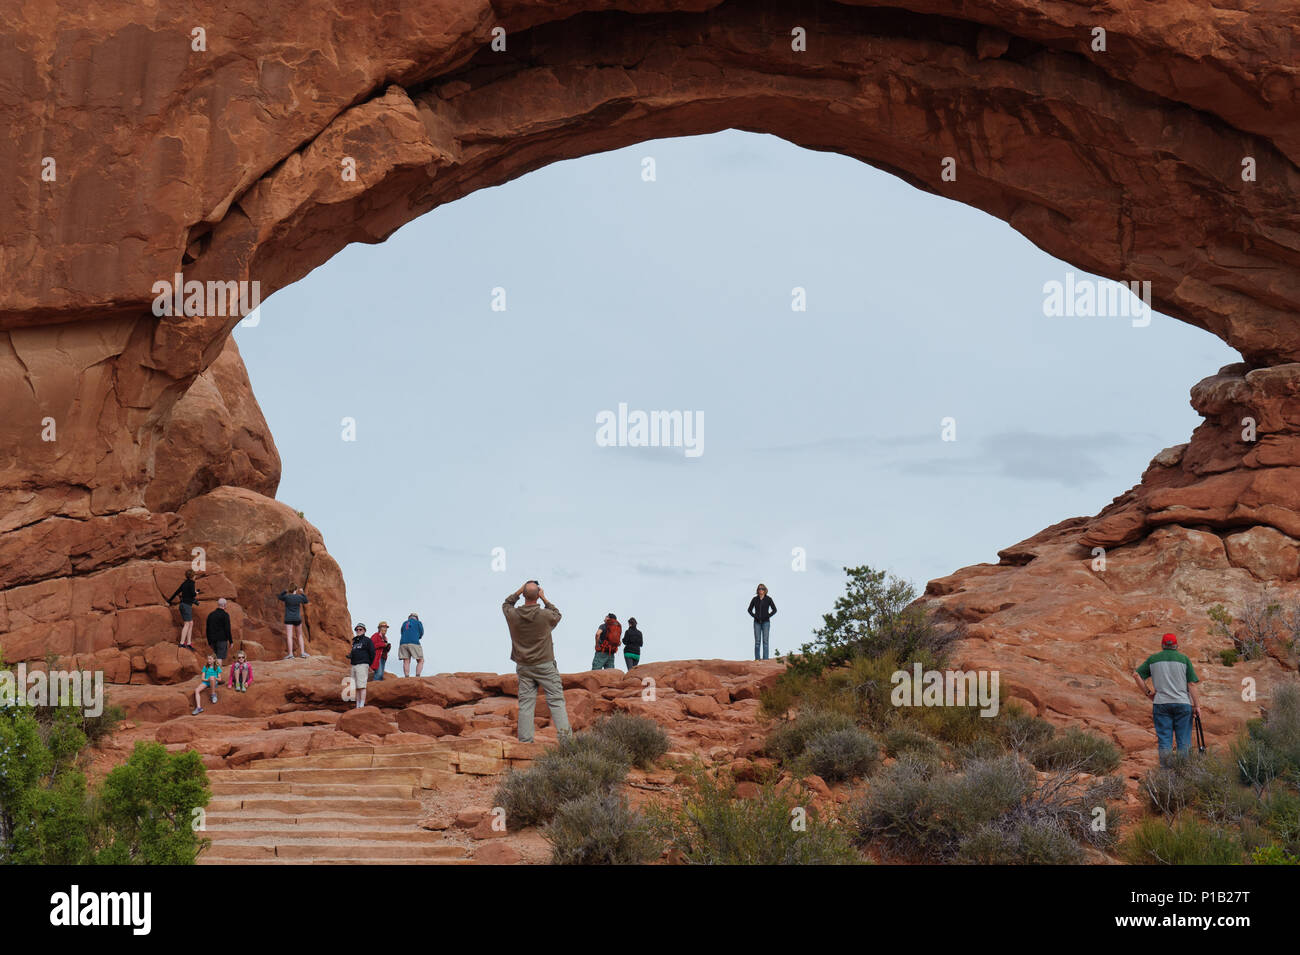 Visitors admiring the North Window Arch at Arches National Park near Moab, Utah, USA. Stock Photo